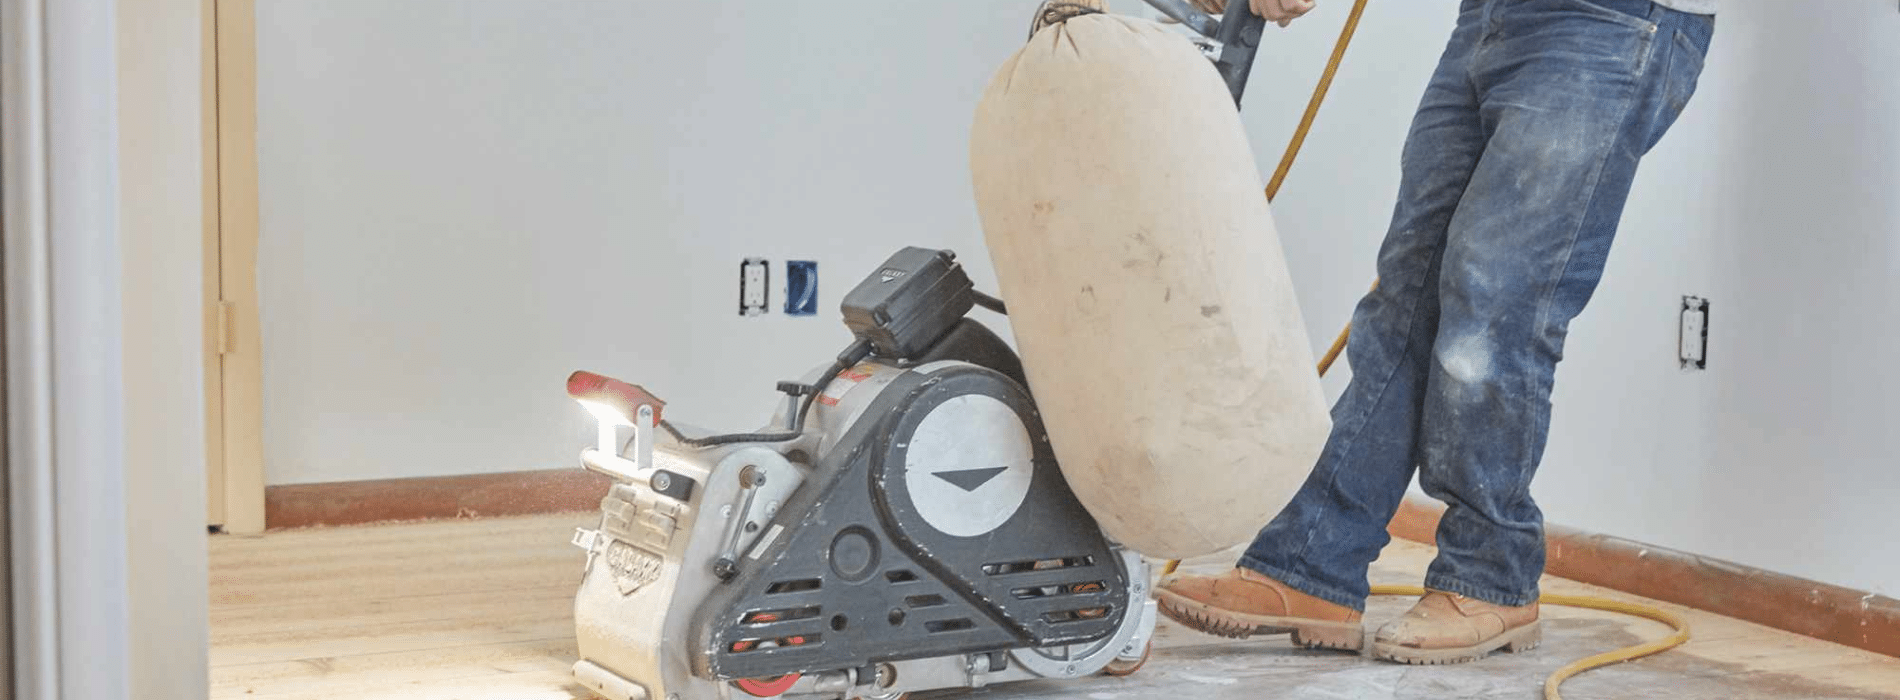 Image of a Bona Scorpion drum sander being operated by Mr Sander® in New Cross, SE14. The sander, measuring 200 mm in dimension, is efficiently sanding a parquet floor. It runs on a power supply of 1.5 kW, operating at a voltage of 240 V with a frequency of 50 Hz.